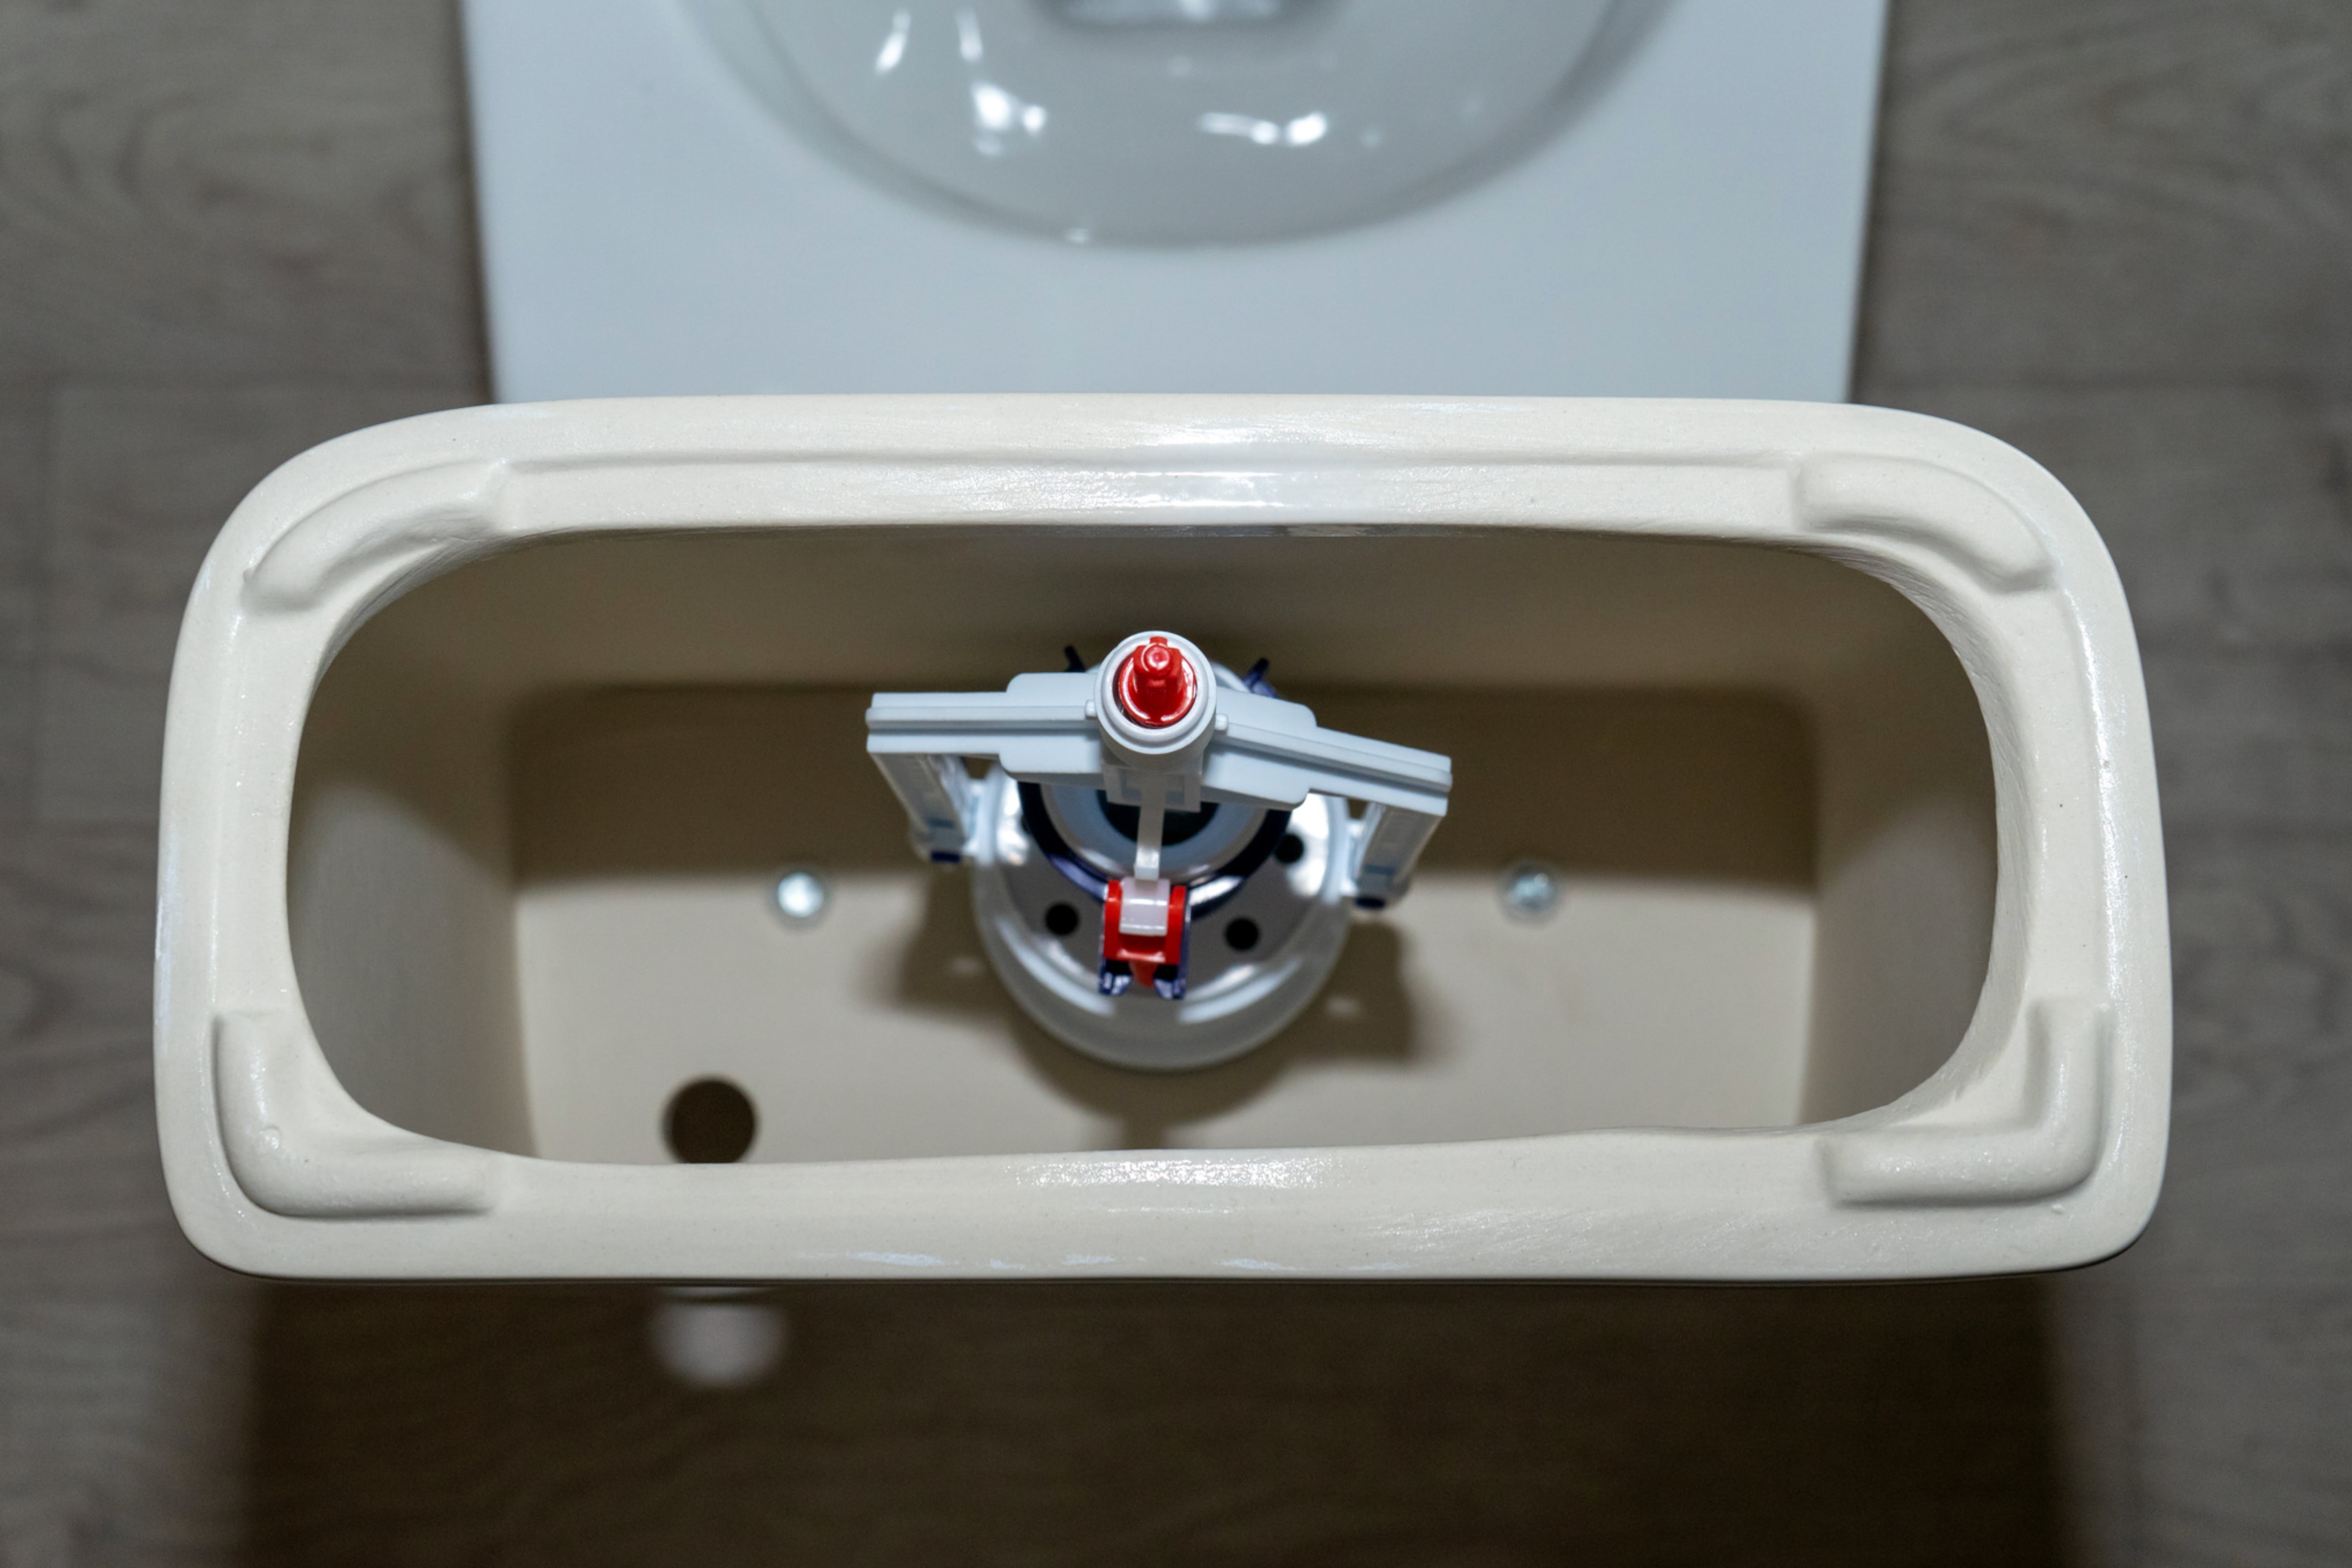 How to clean toilet tank mold